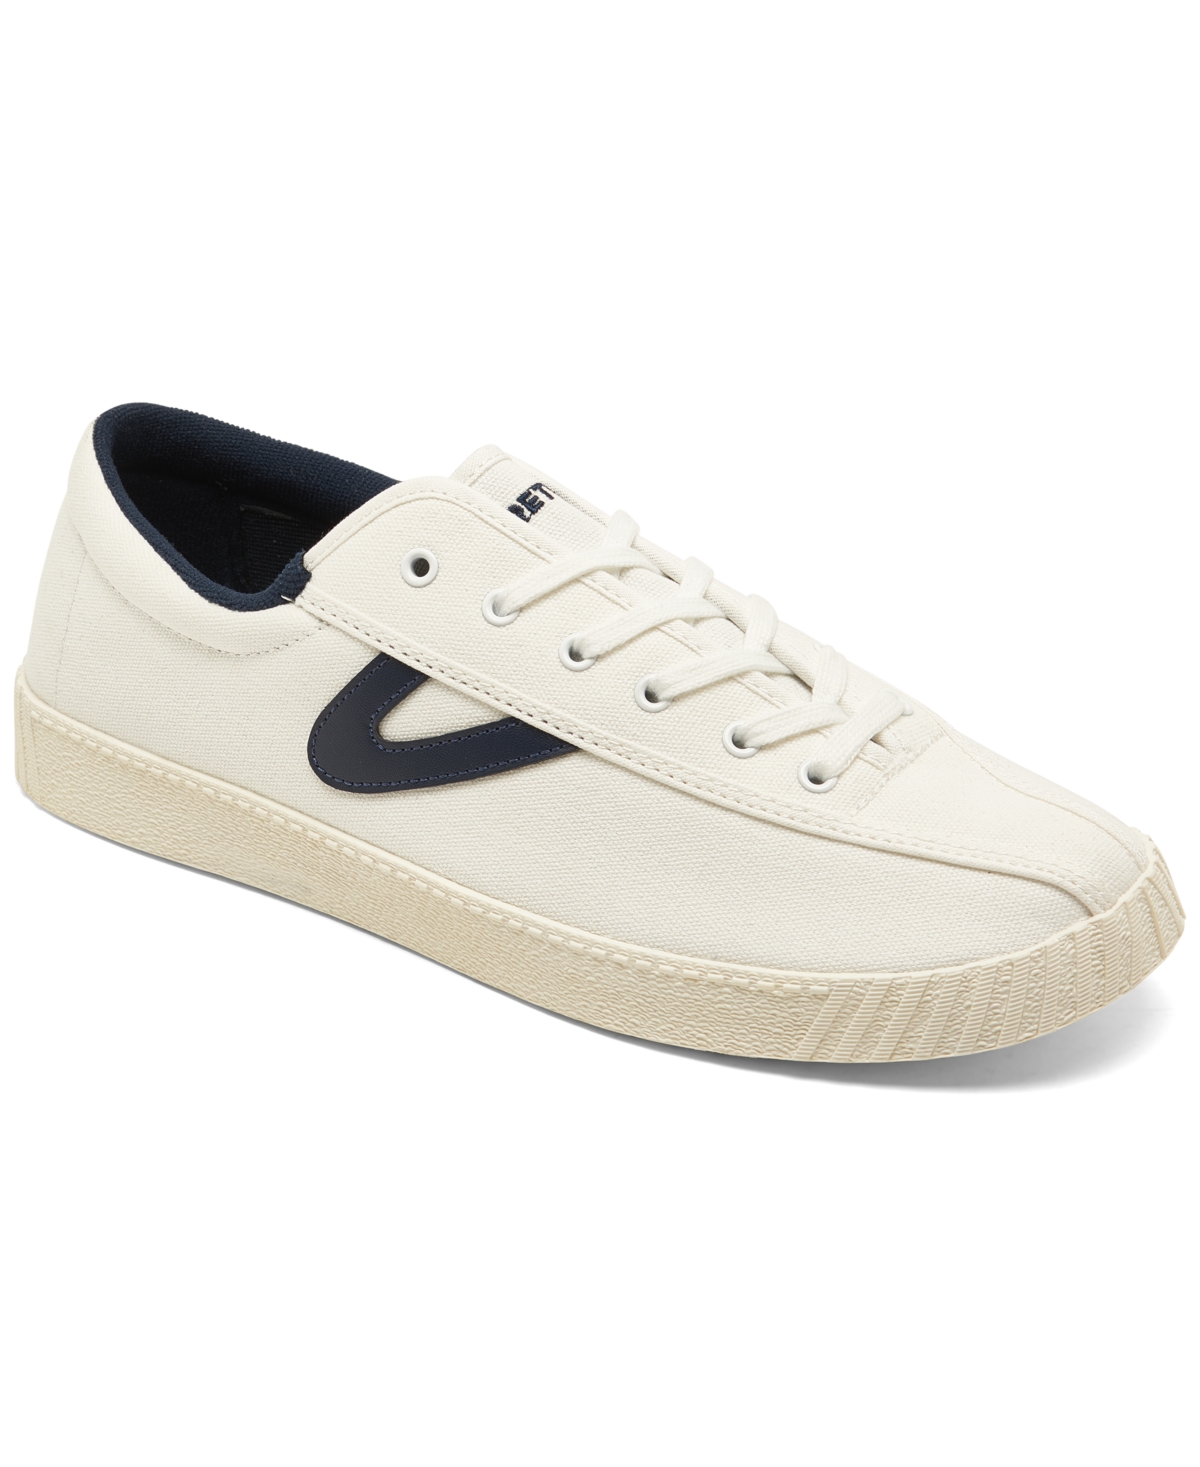 Tretorn Men's Nylite Plus Canvas Casual Sneakers From Finish Line In White,navy